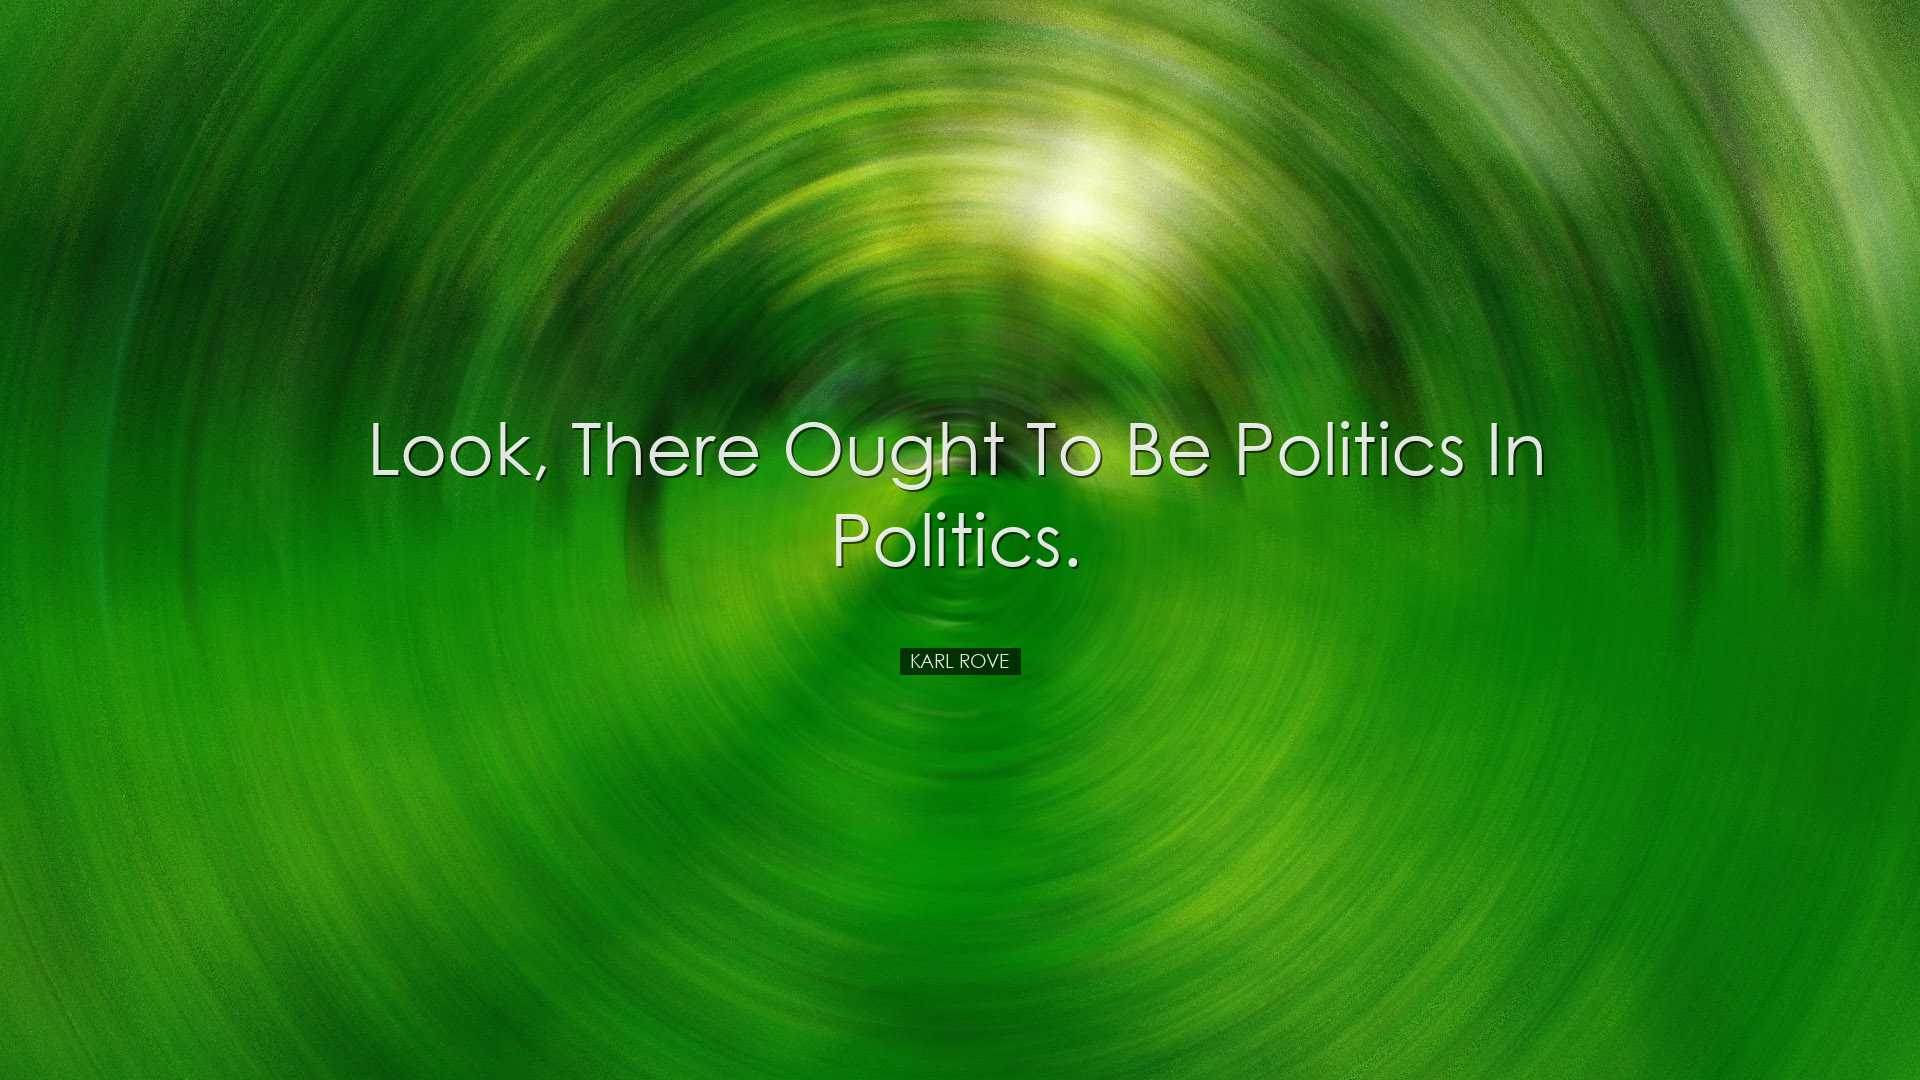 Look, there ought to be politics in politics. - Karl Rove